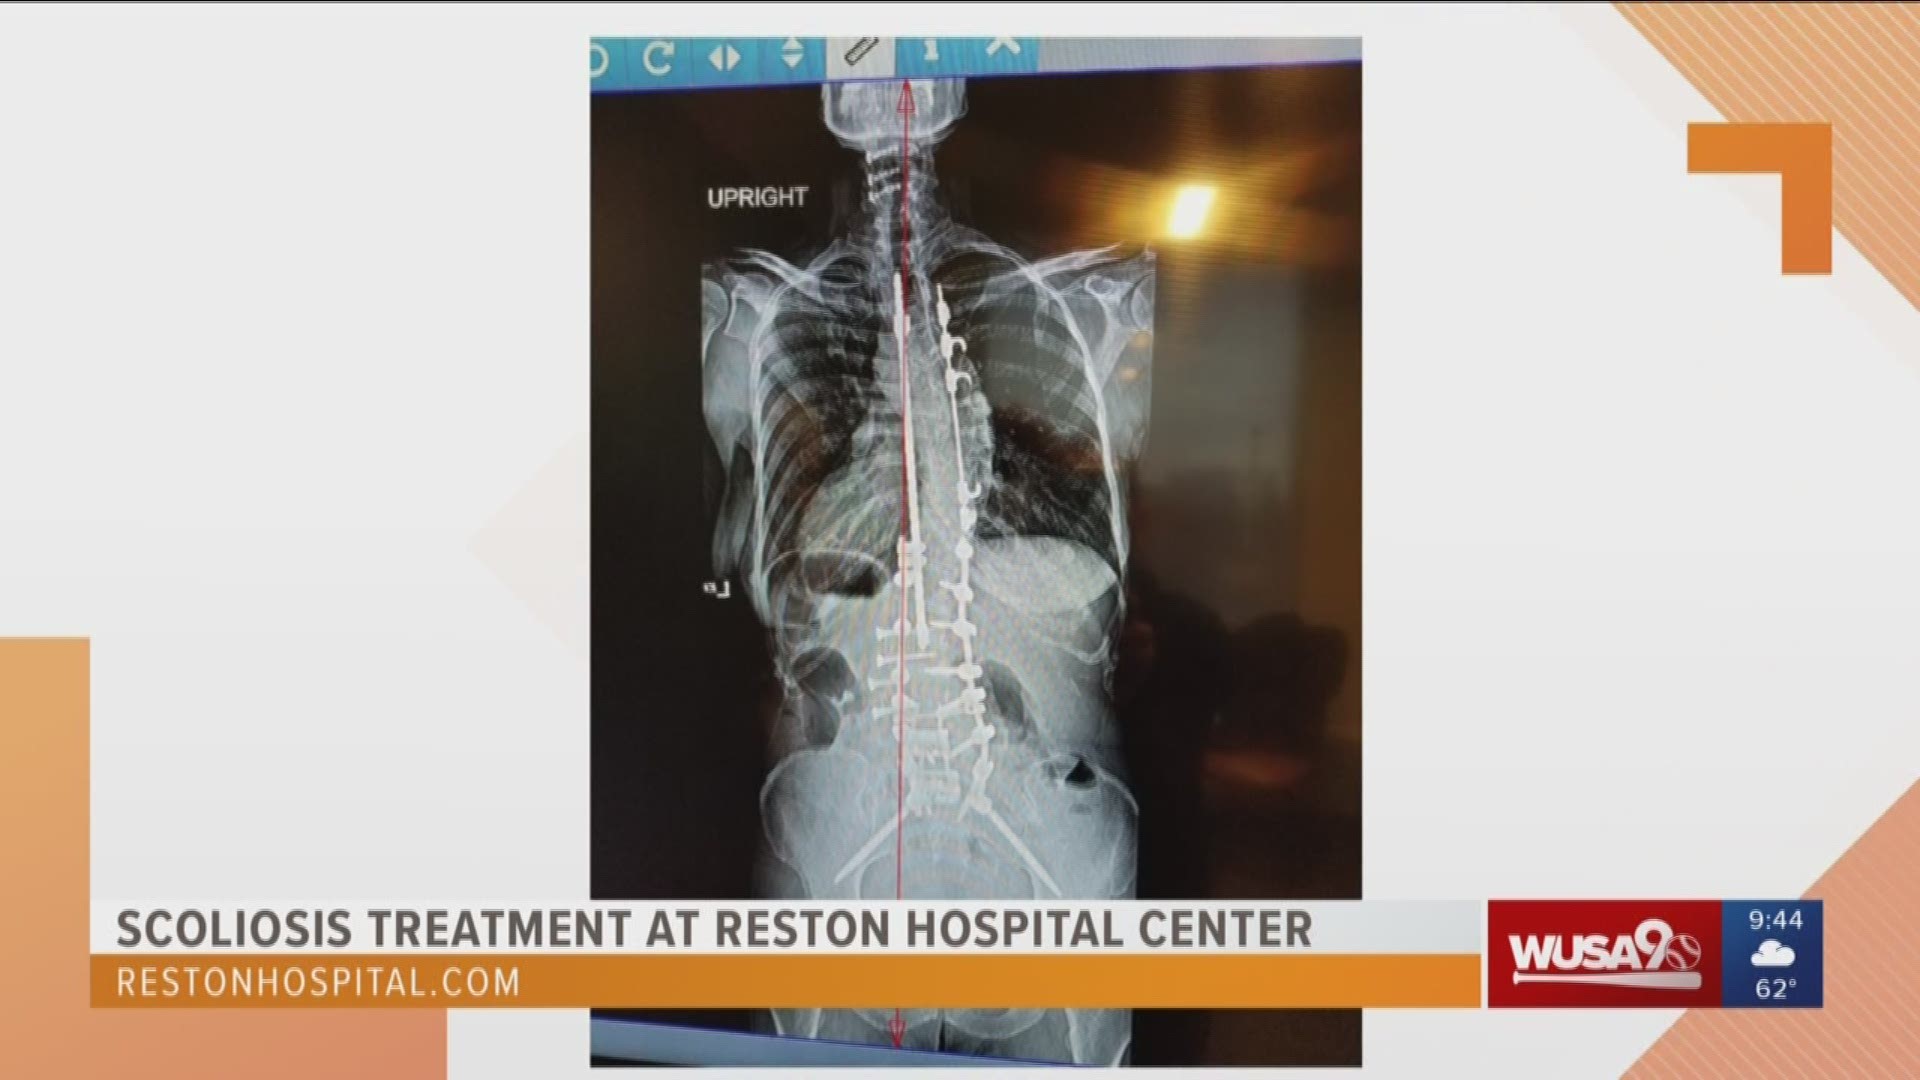 Barbara Jones explains how the scoliosis treatment she received at Reston Hospital Center helped her get back on her feet.  Sponsored by Reston Hospital Center.